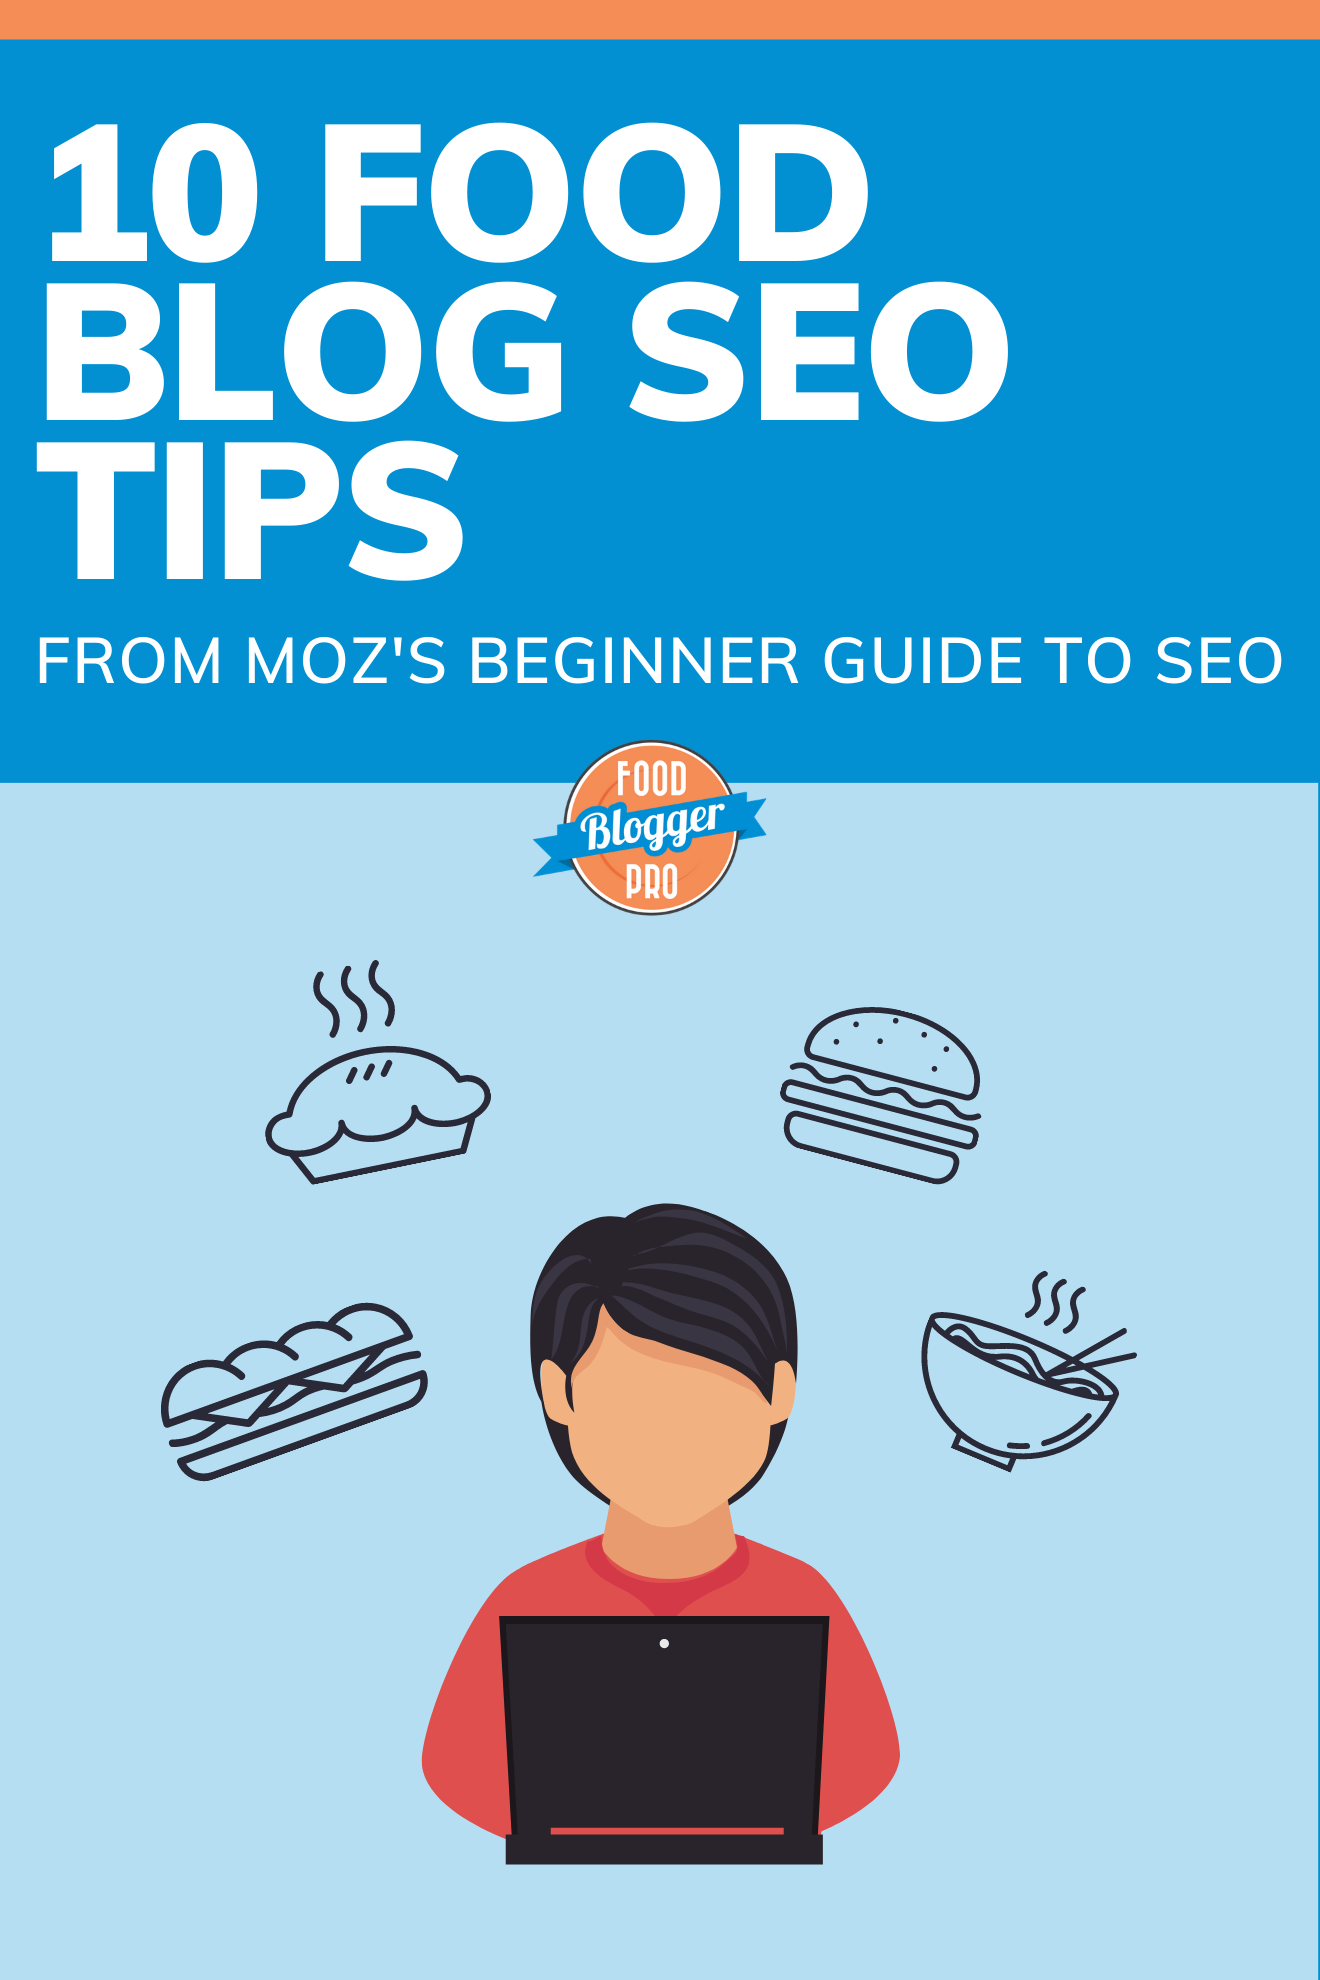 Beginner's Guide to SEO (Search Engine Optimization) - Moz